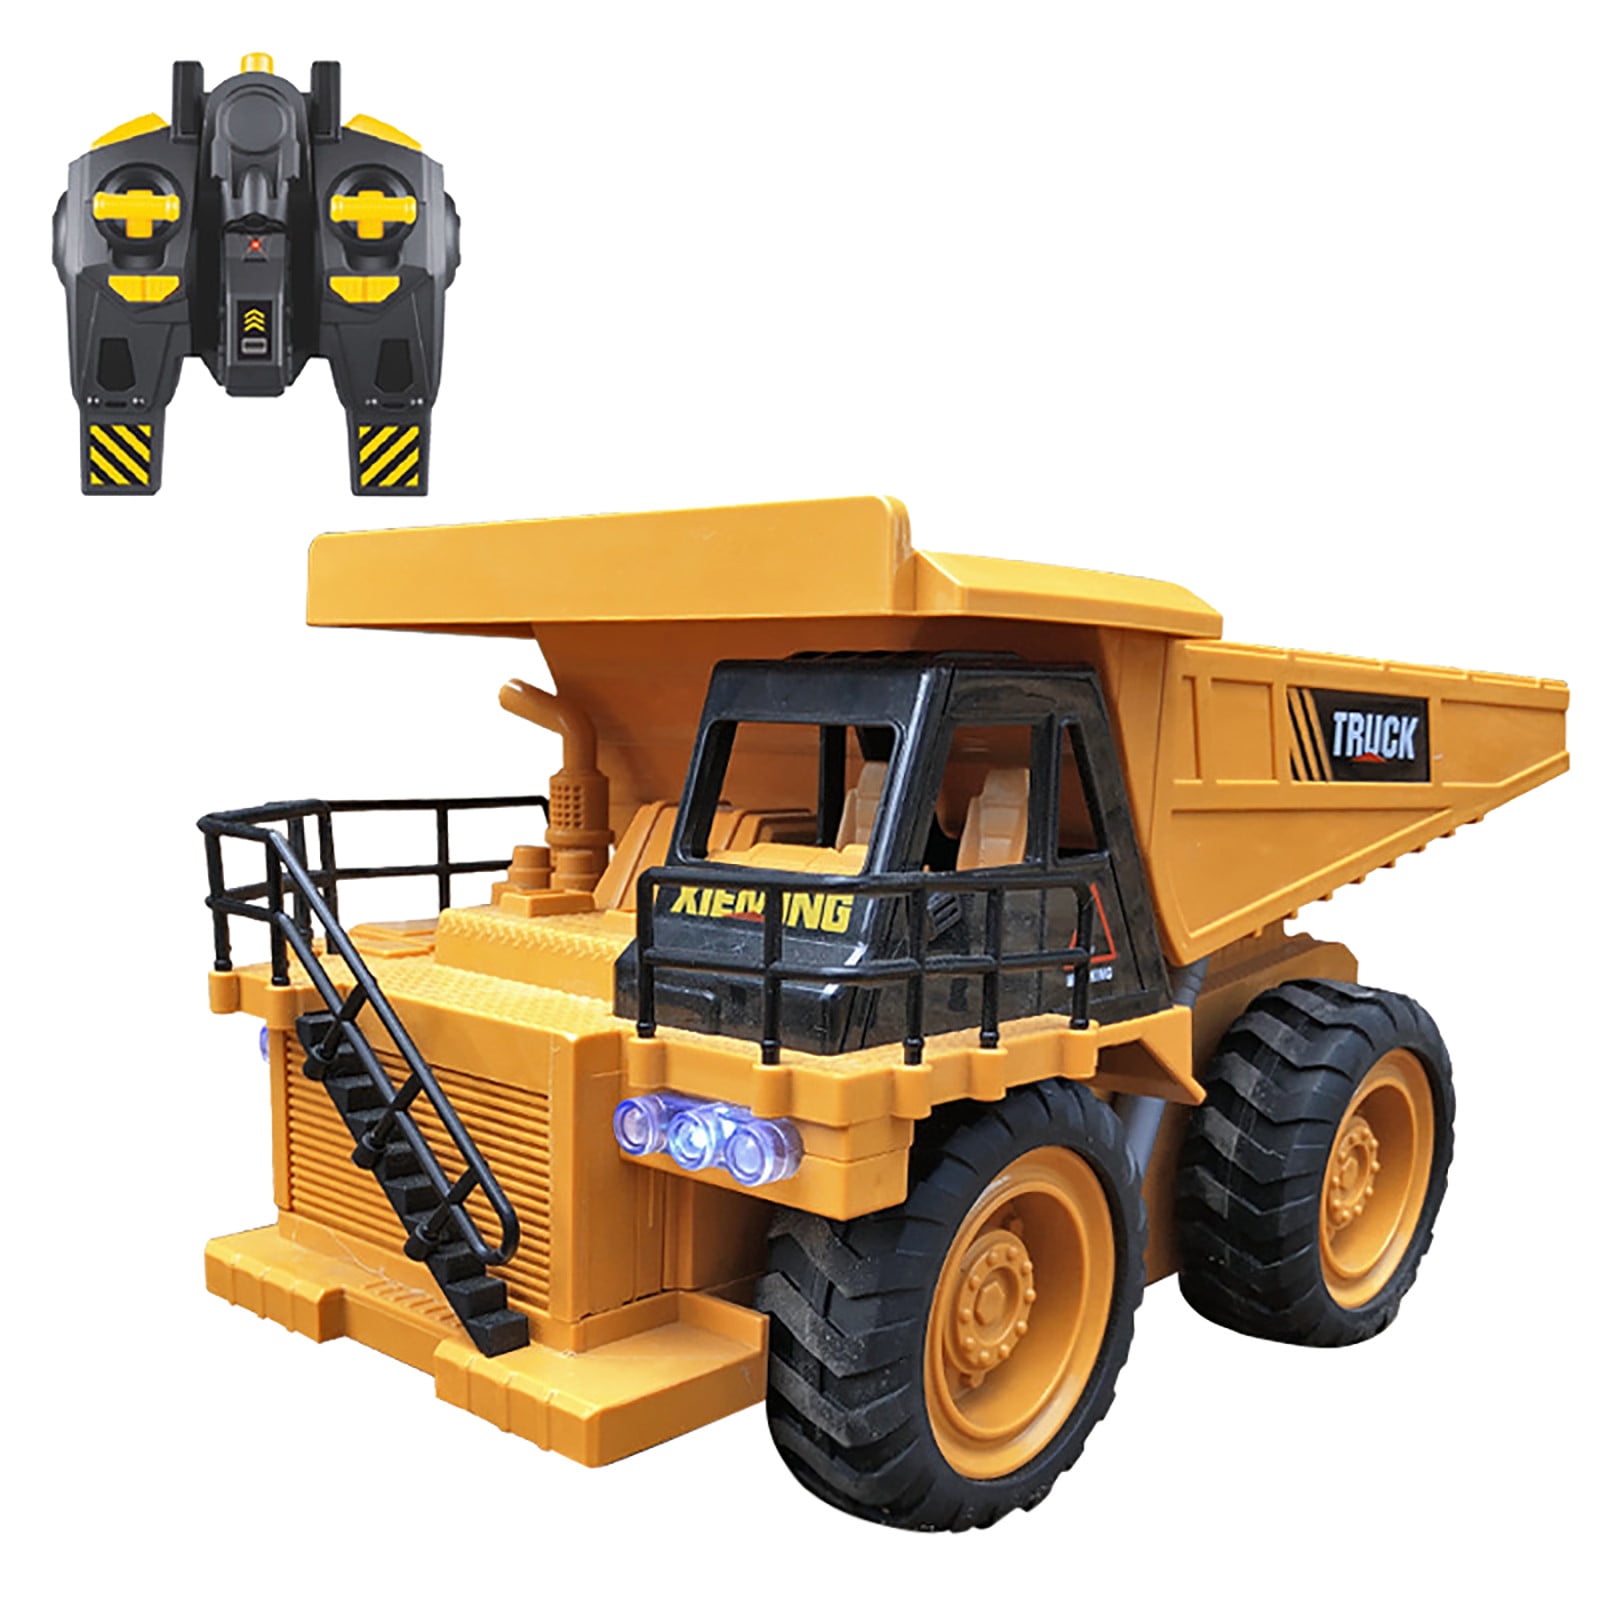 Remote Control Forklift Toy Large Rc Construction Toys Truck For Kids 